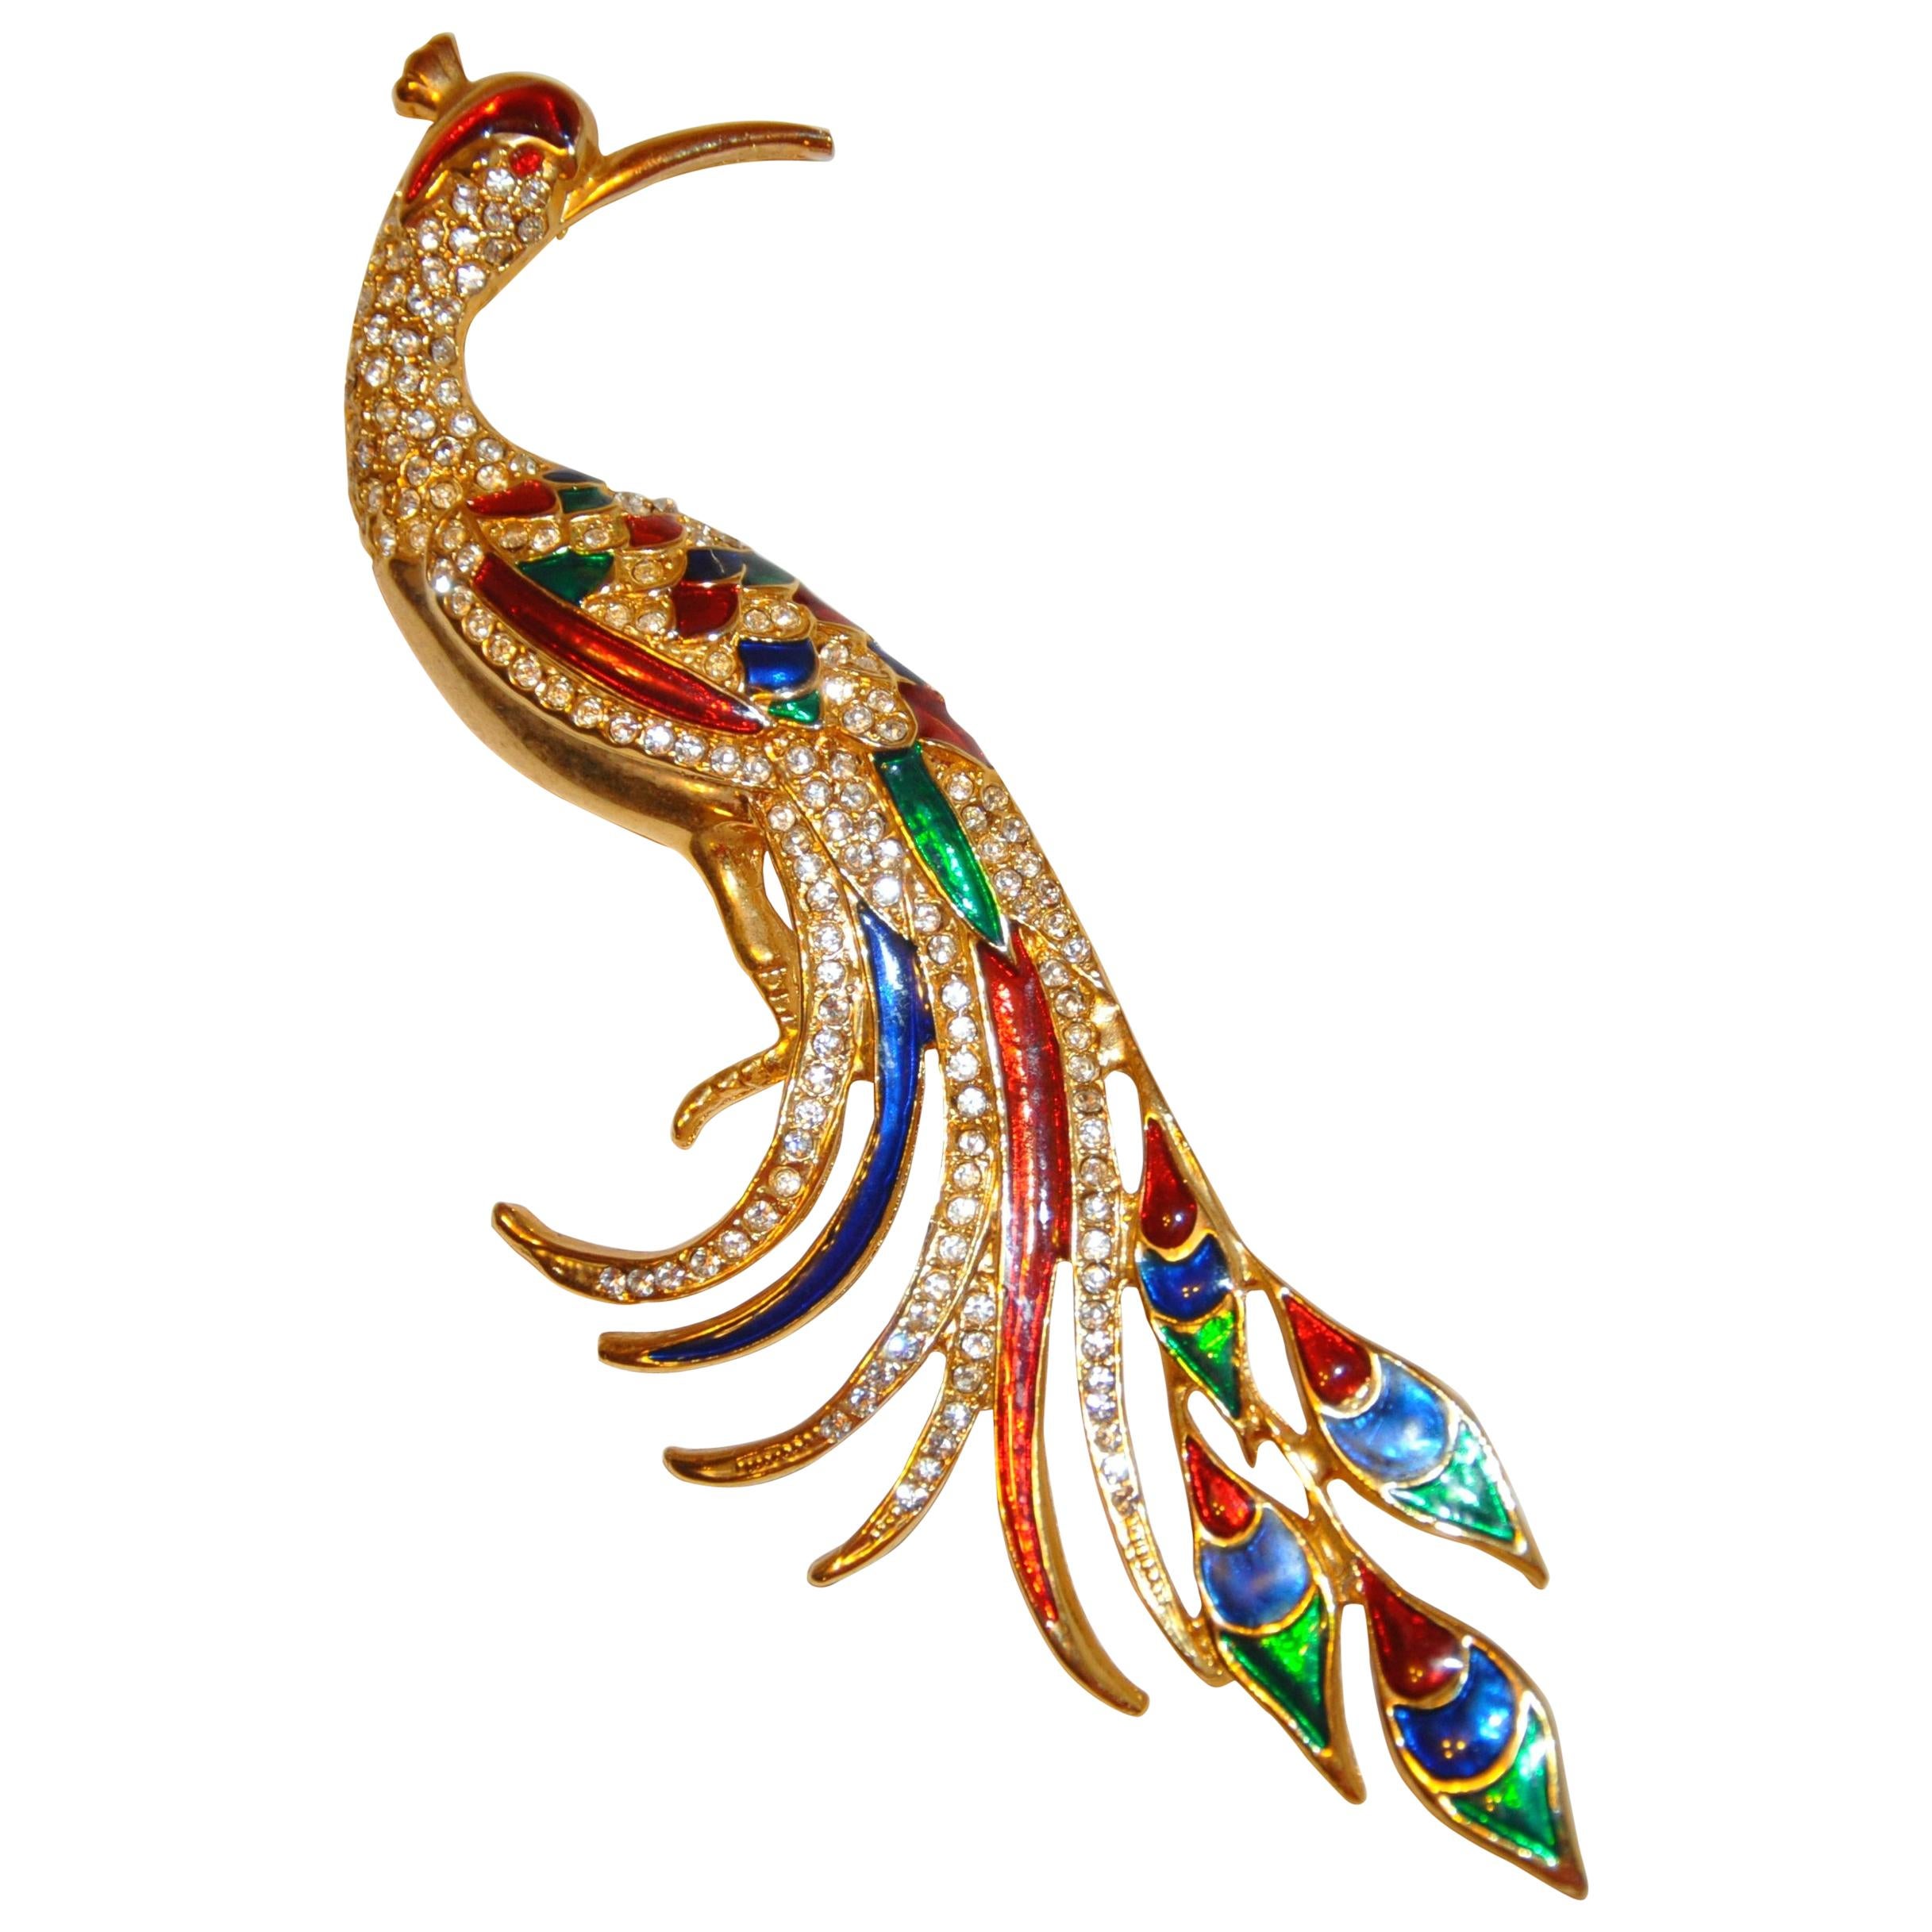 Huge Magnificent Multi-Color Enamel and Faux Diamonds "Peacock" Brooch